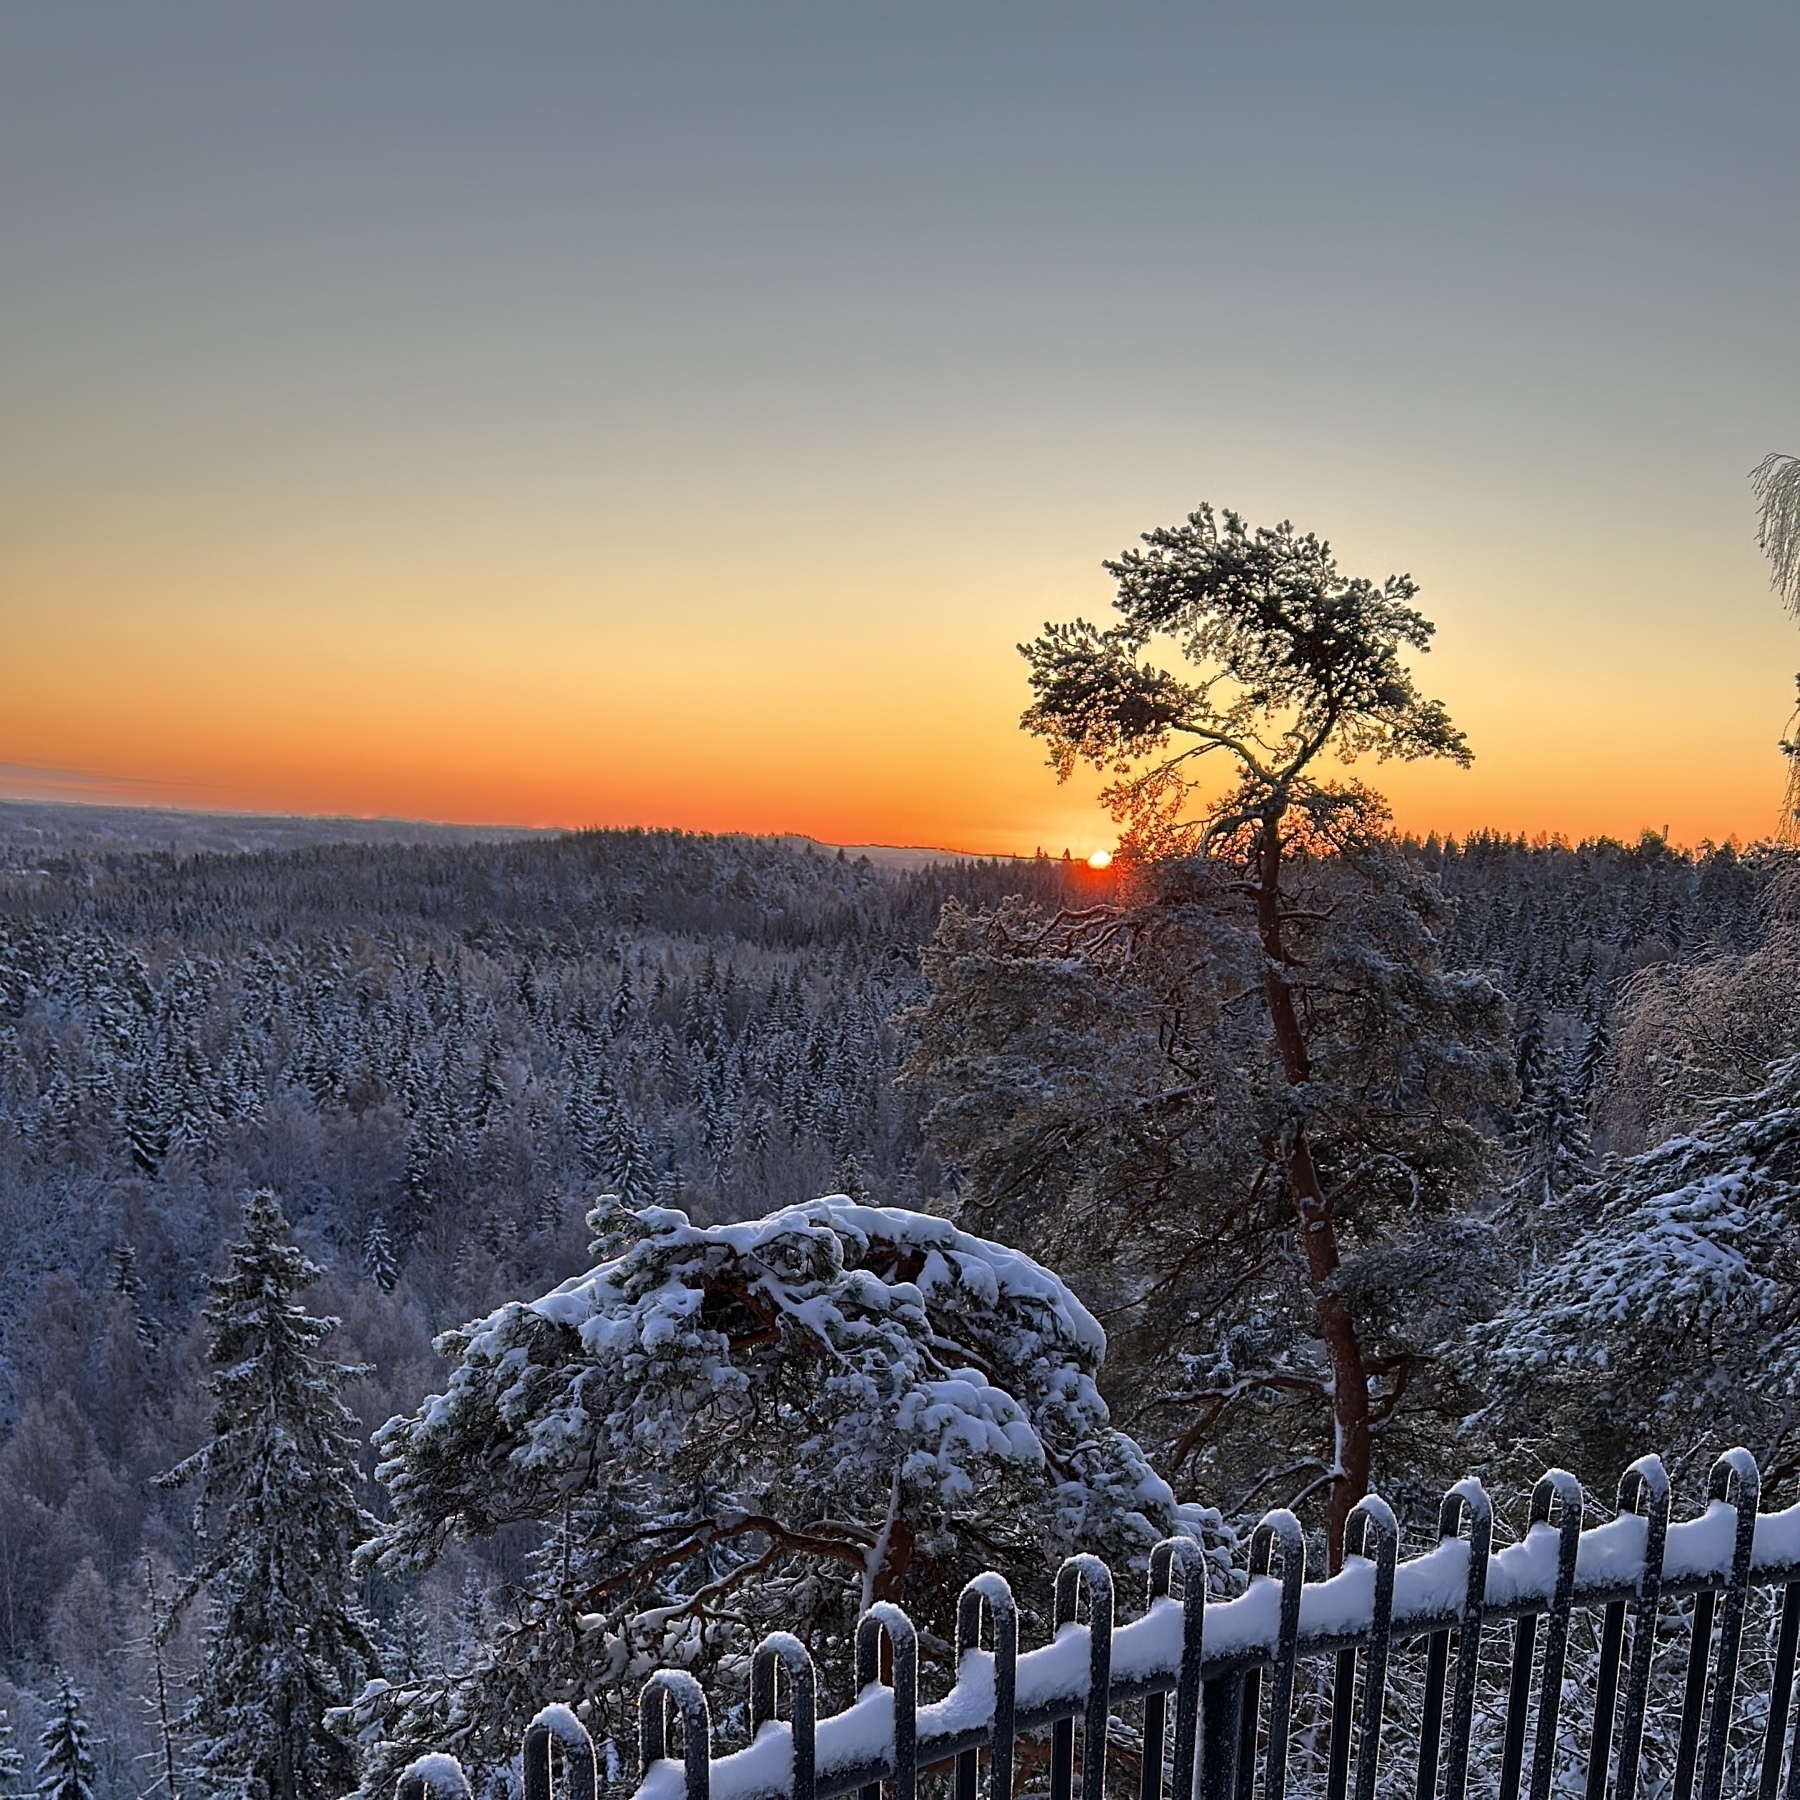 sunrise seen through a snow pine tree on top of a steep hill, snowy forest below